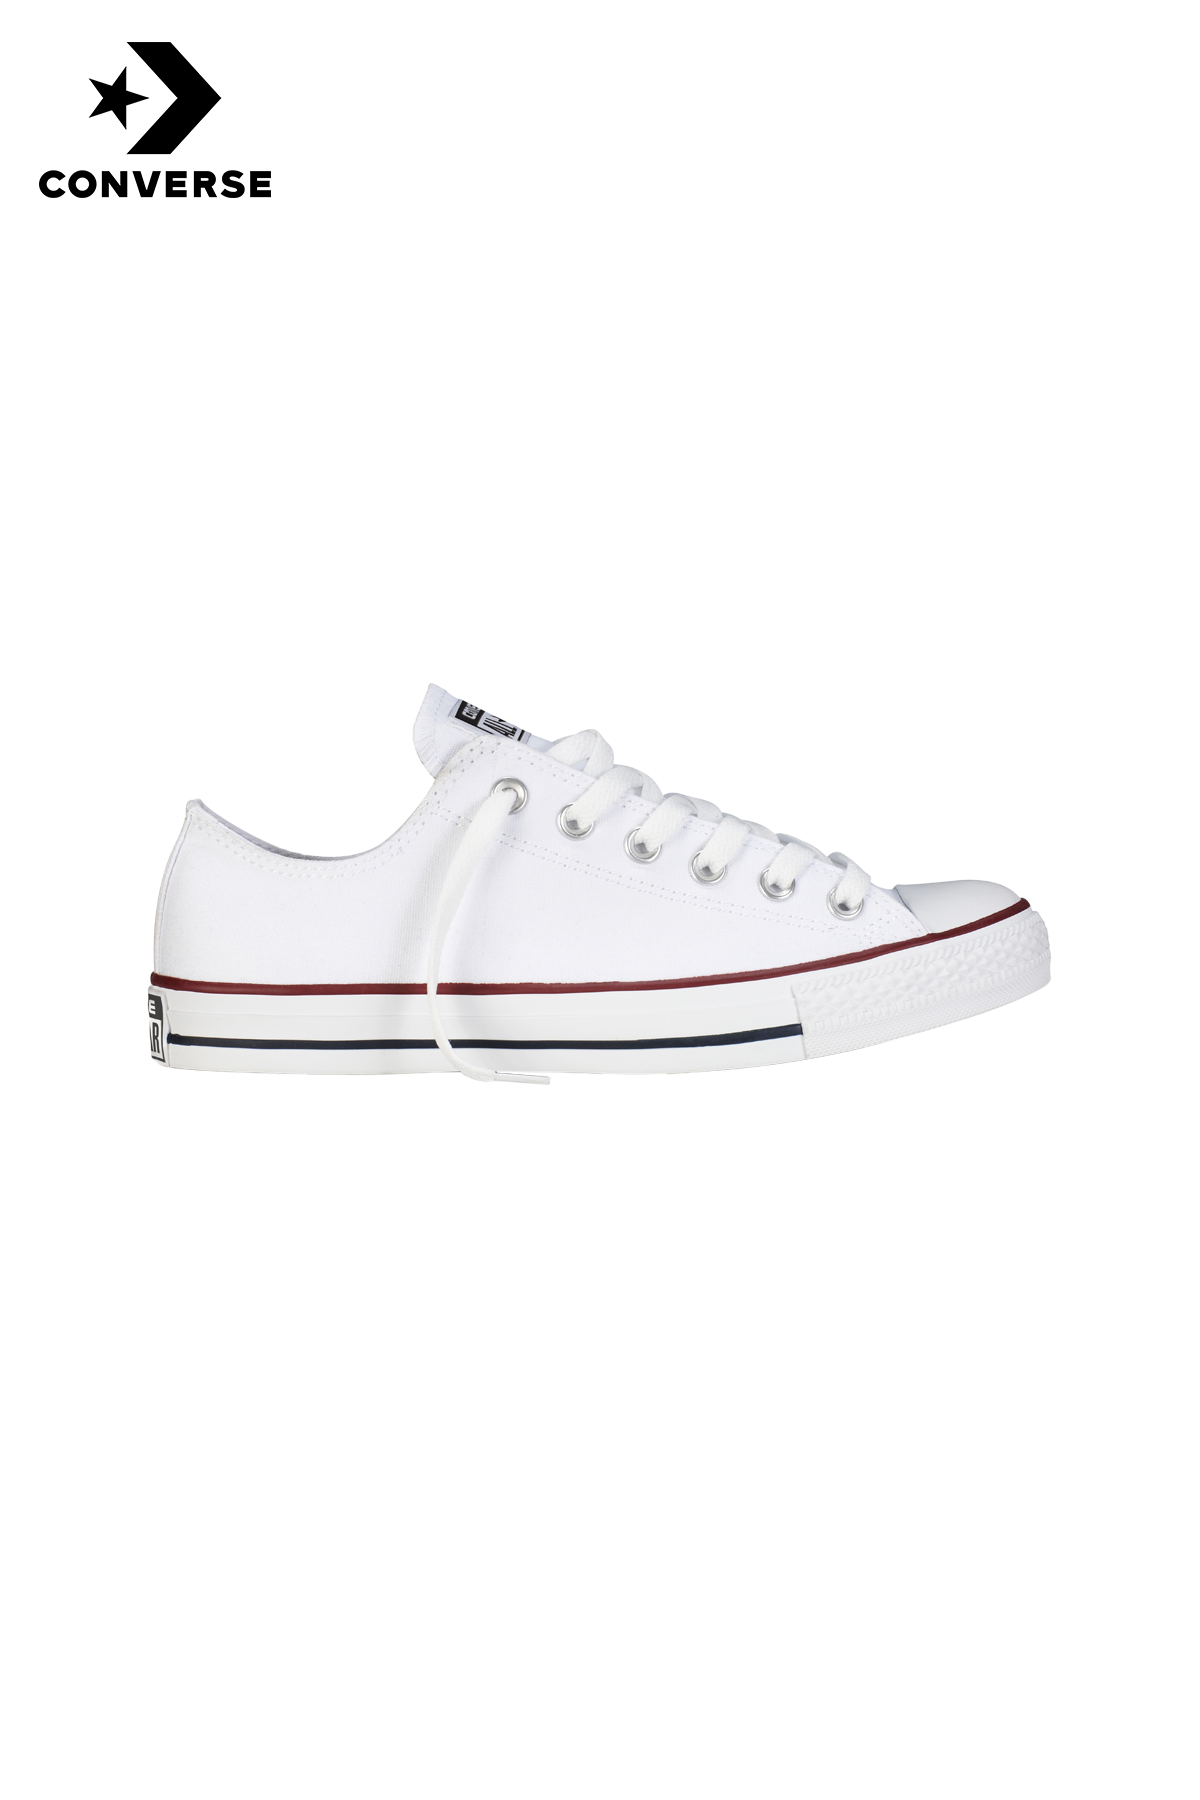 converse all star buy online